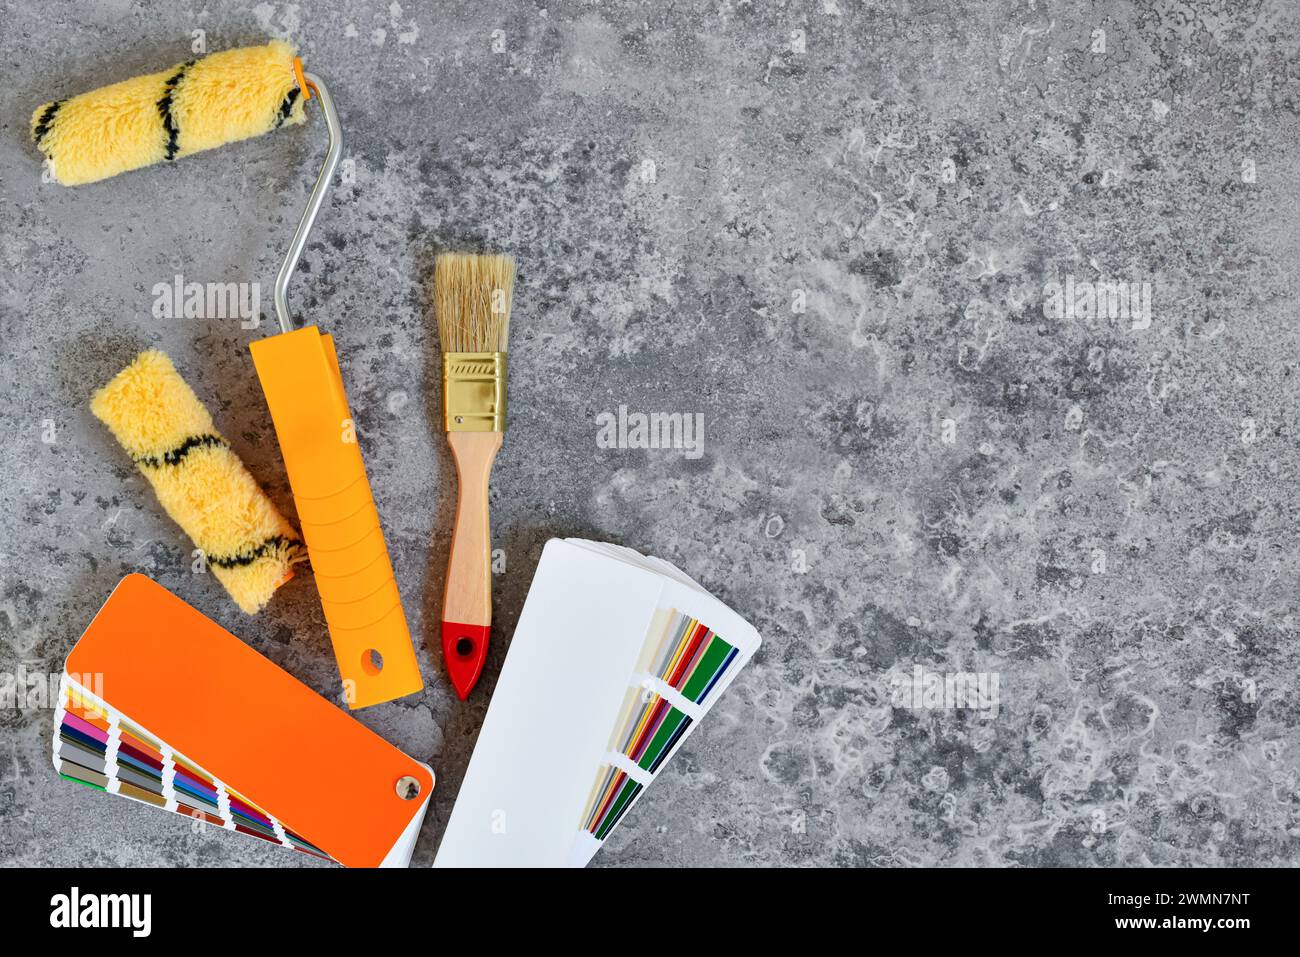 Home paint roller and a paint brushe, color swatches on gray stone background. Top view. Repair housing concept. Stock Photo